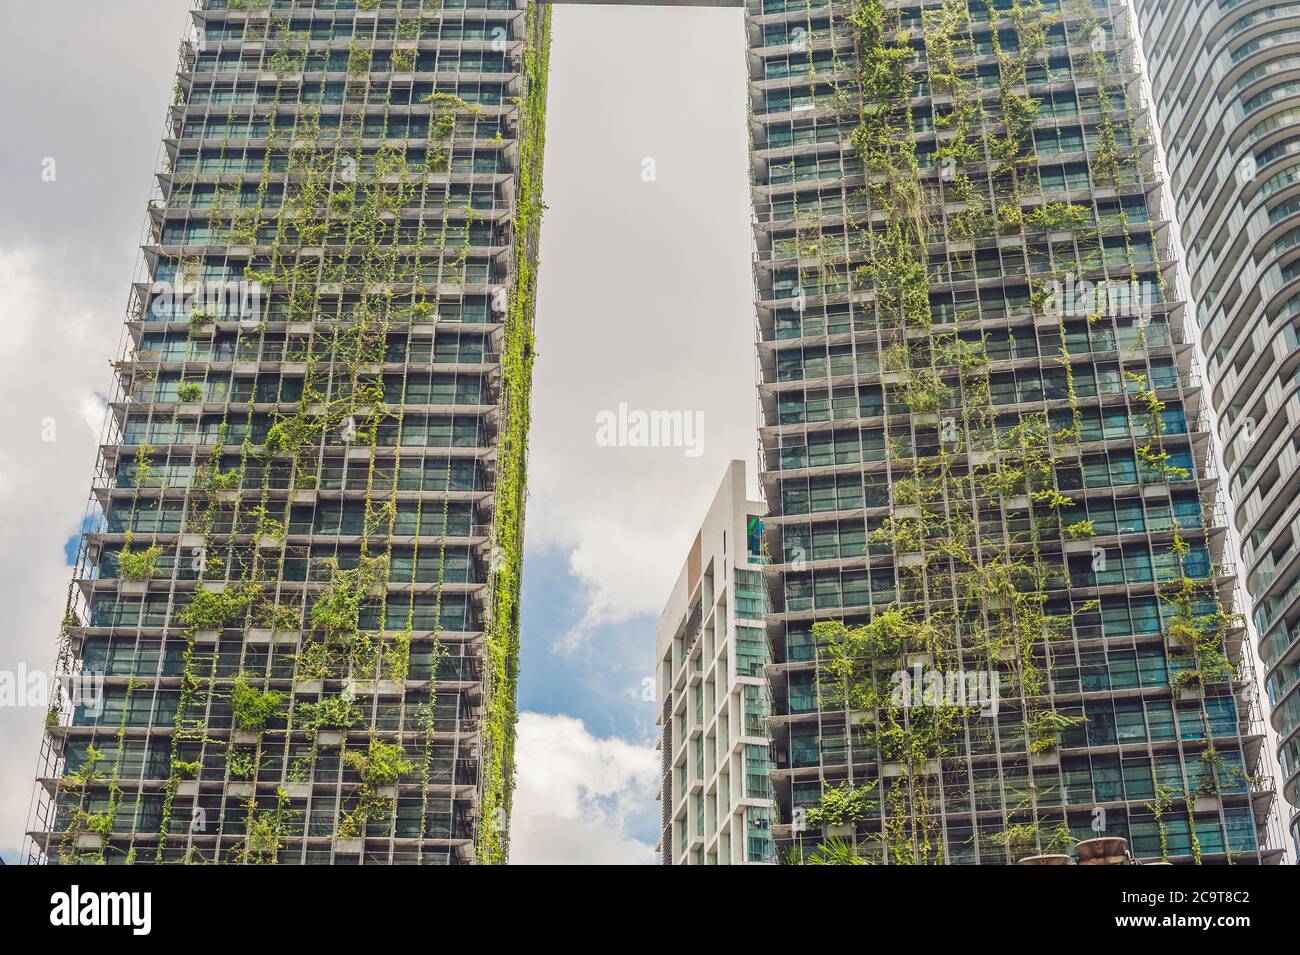 KUALA LUMPUR, MALAYSIA - 24 FEBRUARY 2017: Eco architecture. Green skyscraper building with plants growing on the facade. Ecology and green living in Stock Photo